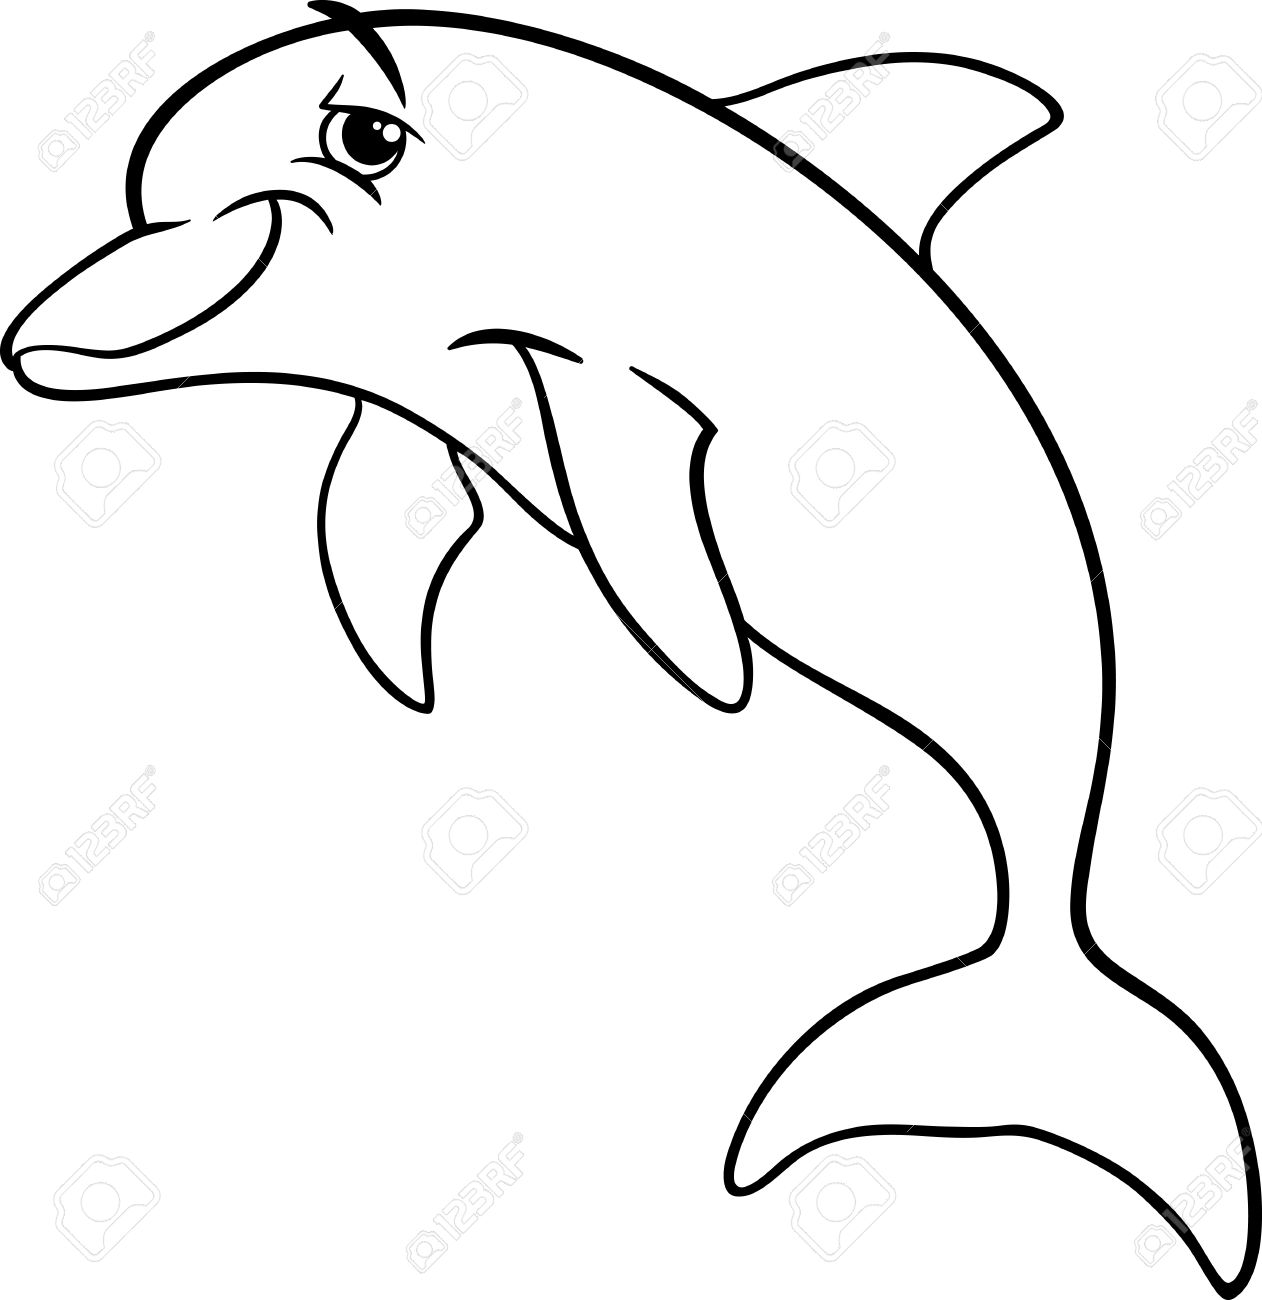 Sea Creatures Clipart Black And White | Free download on ...